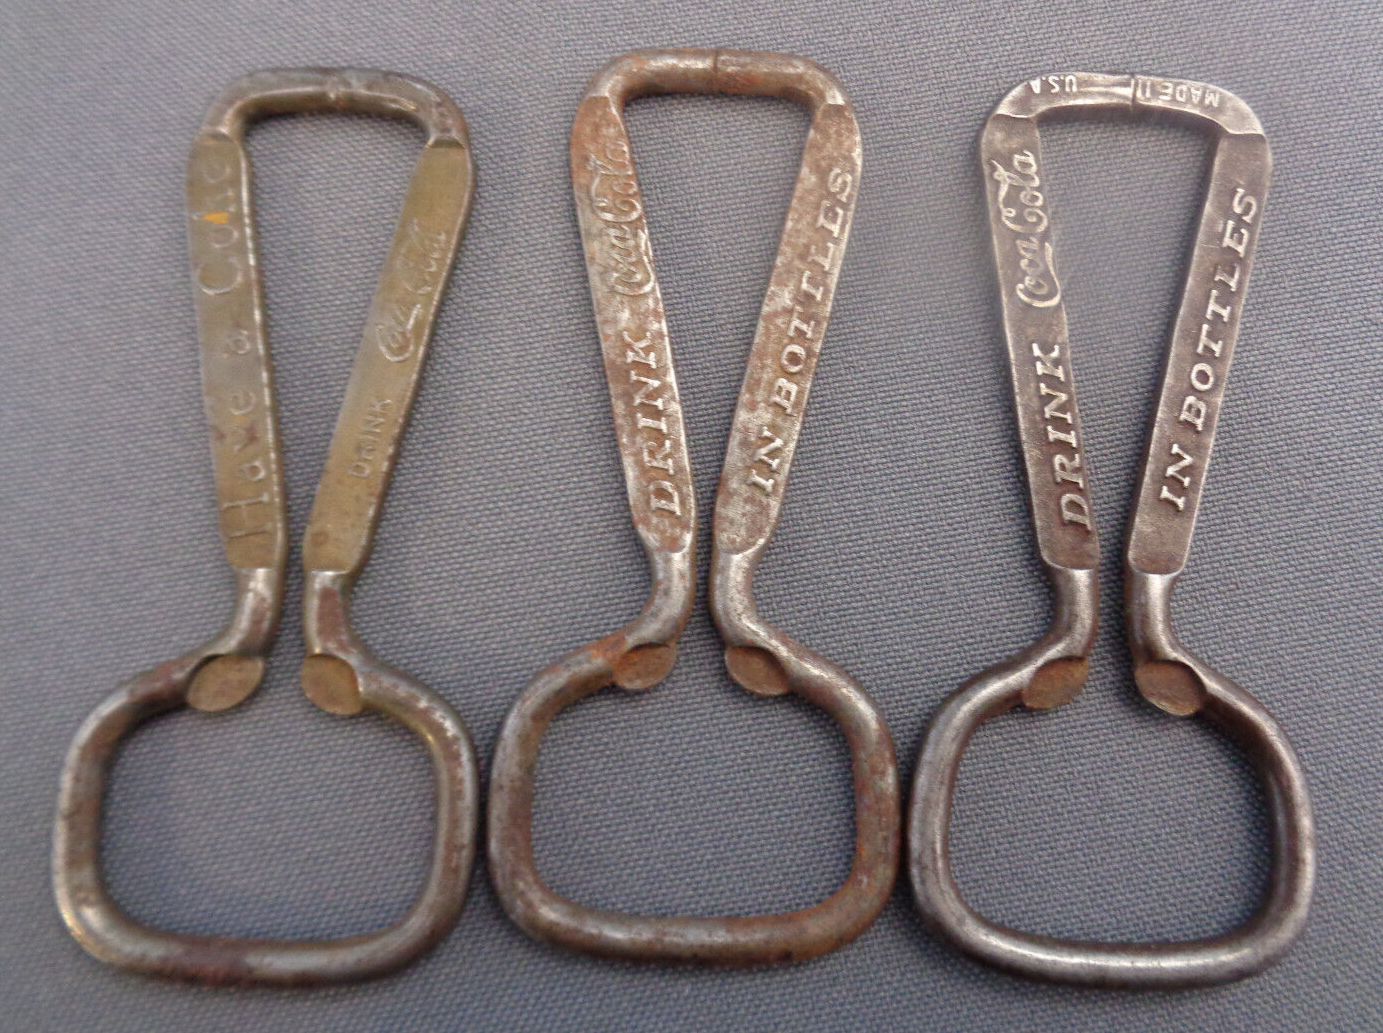 Primary image for Lot of 3 Old Bottle Openers Drink Coca Cola in Bottles Have a Coke Hand Held Key